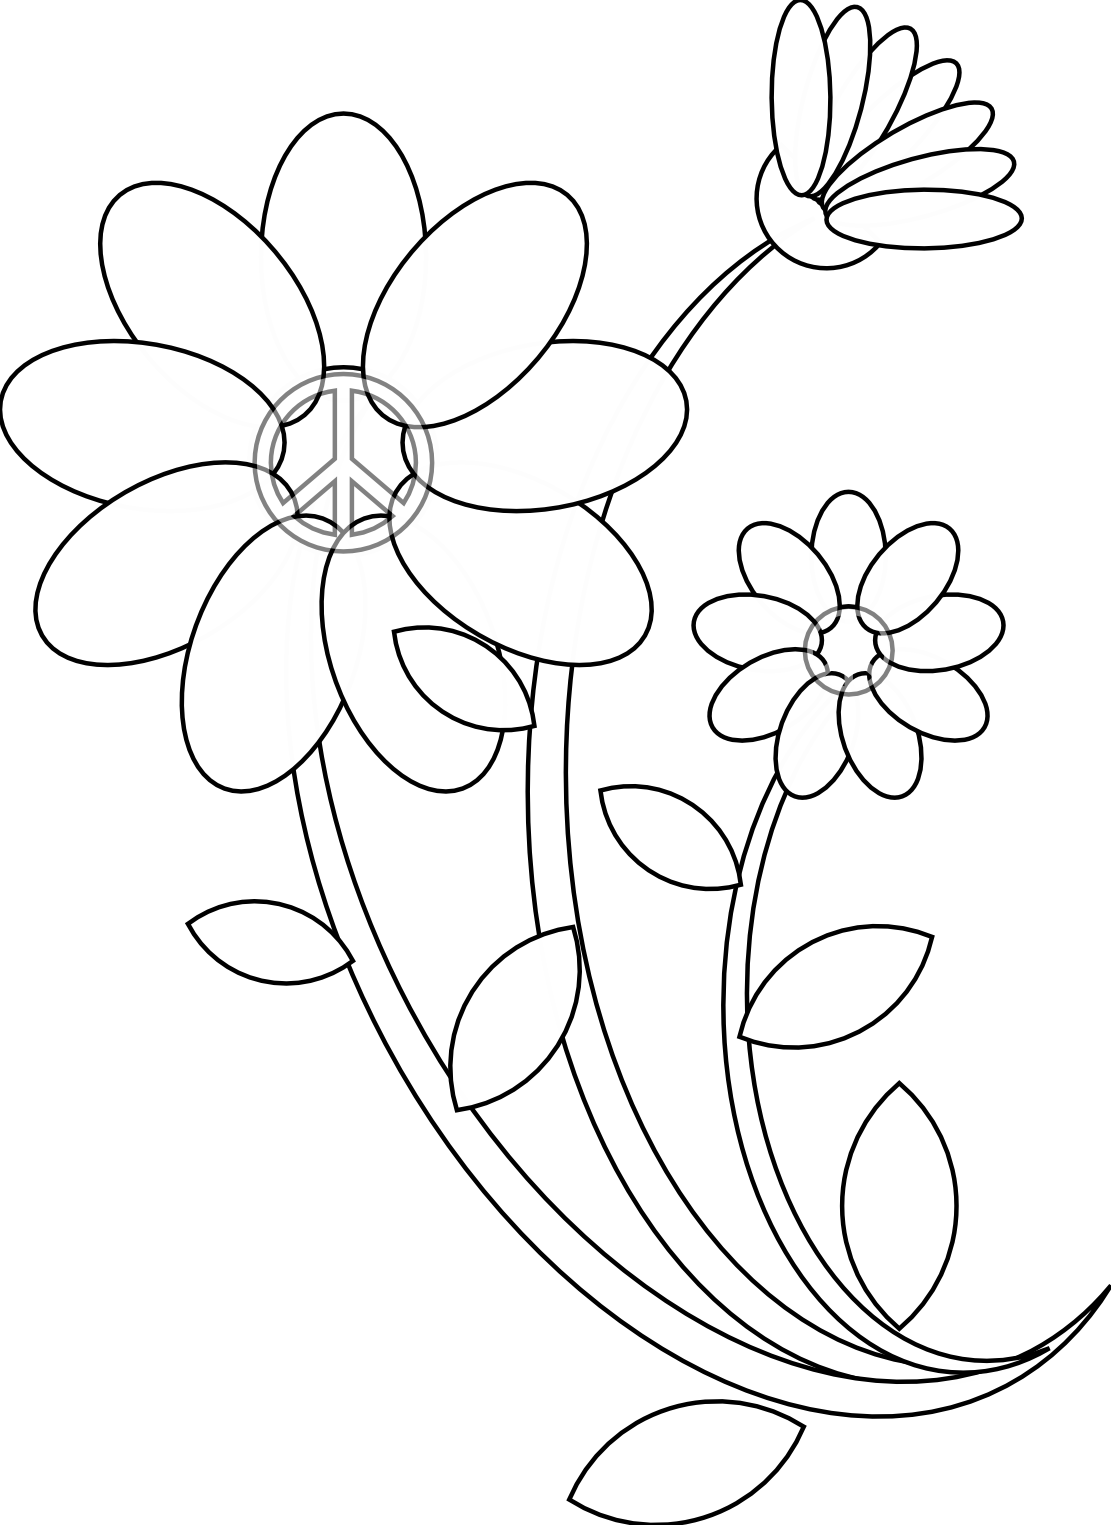 free-line-drawing-of-a-flower-download-free-line-drawing-of-a-flower